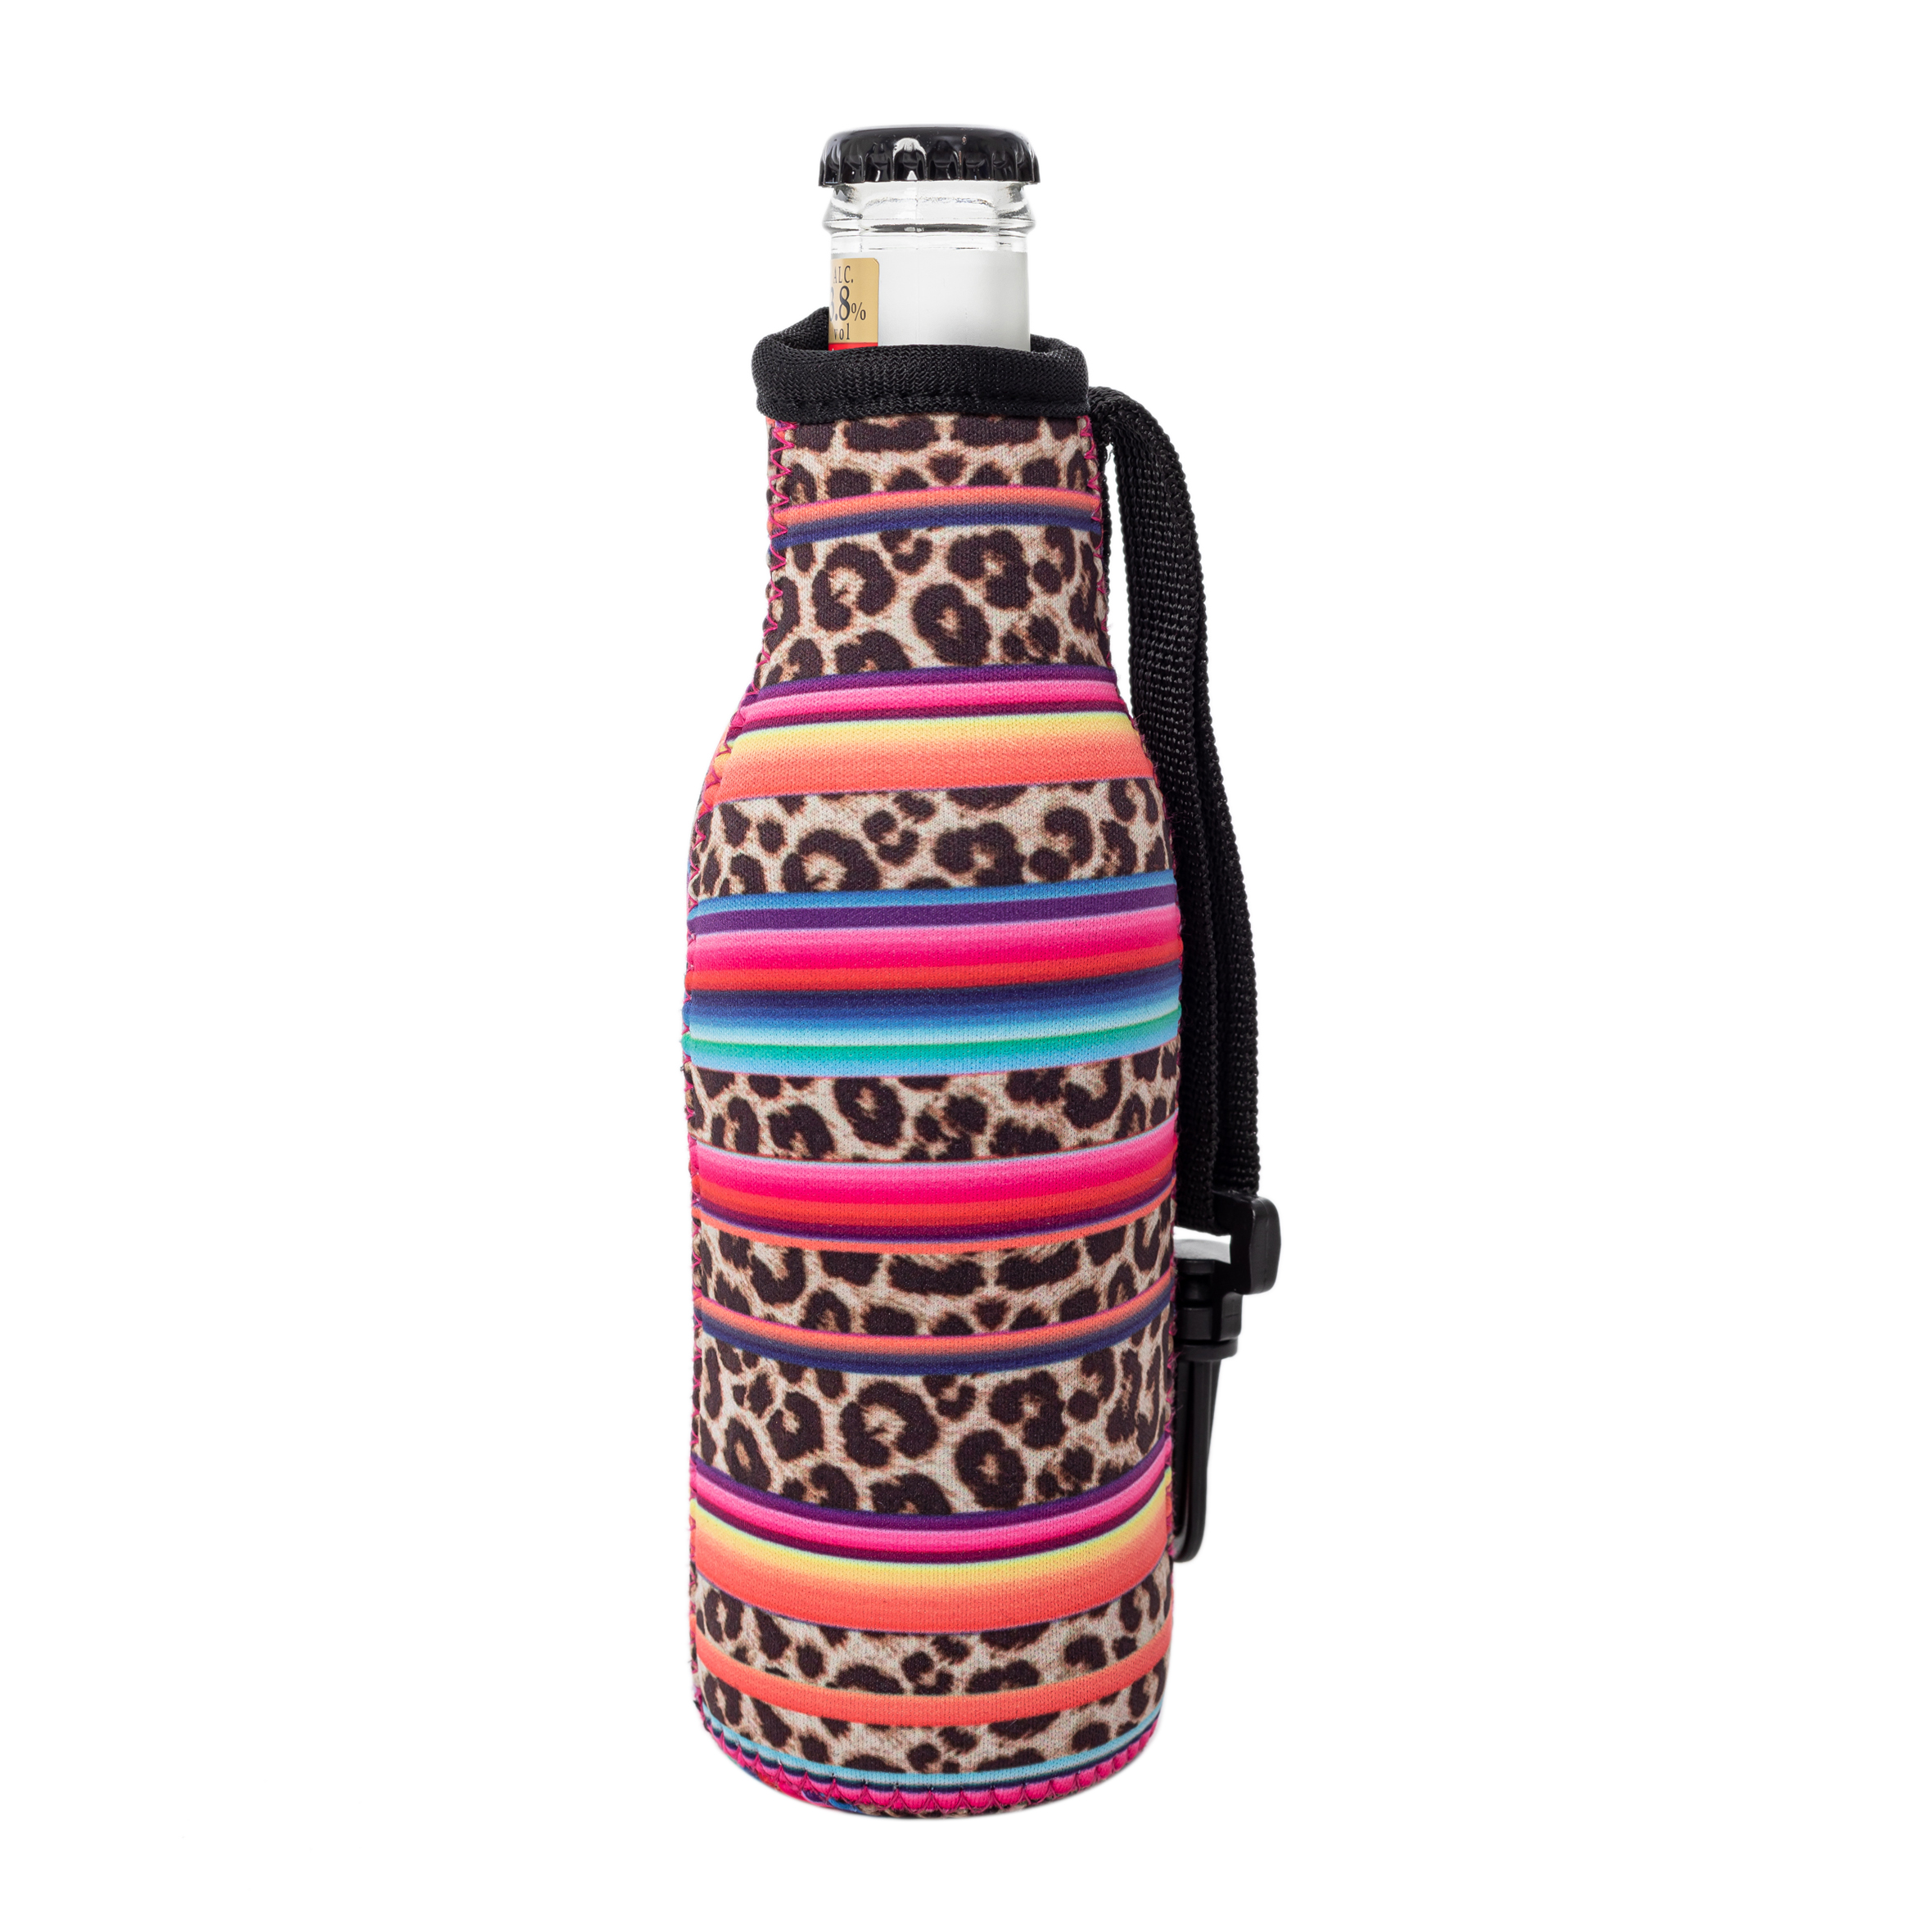 The Perfect Float Trip  12oz Long Neck Zipper Neoprene Bottle Coolie with Built-in Hand Sanitizer Holder - Serape Print - CLOSEOUT